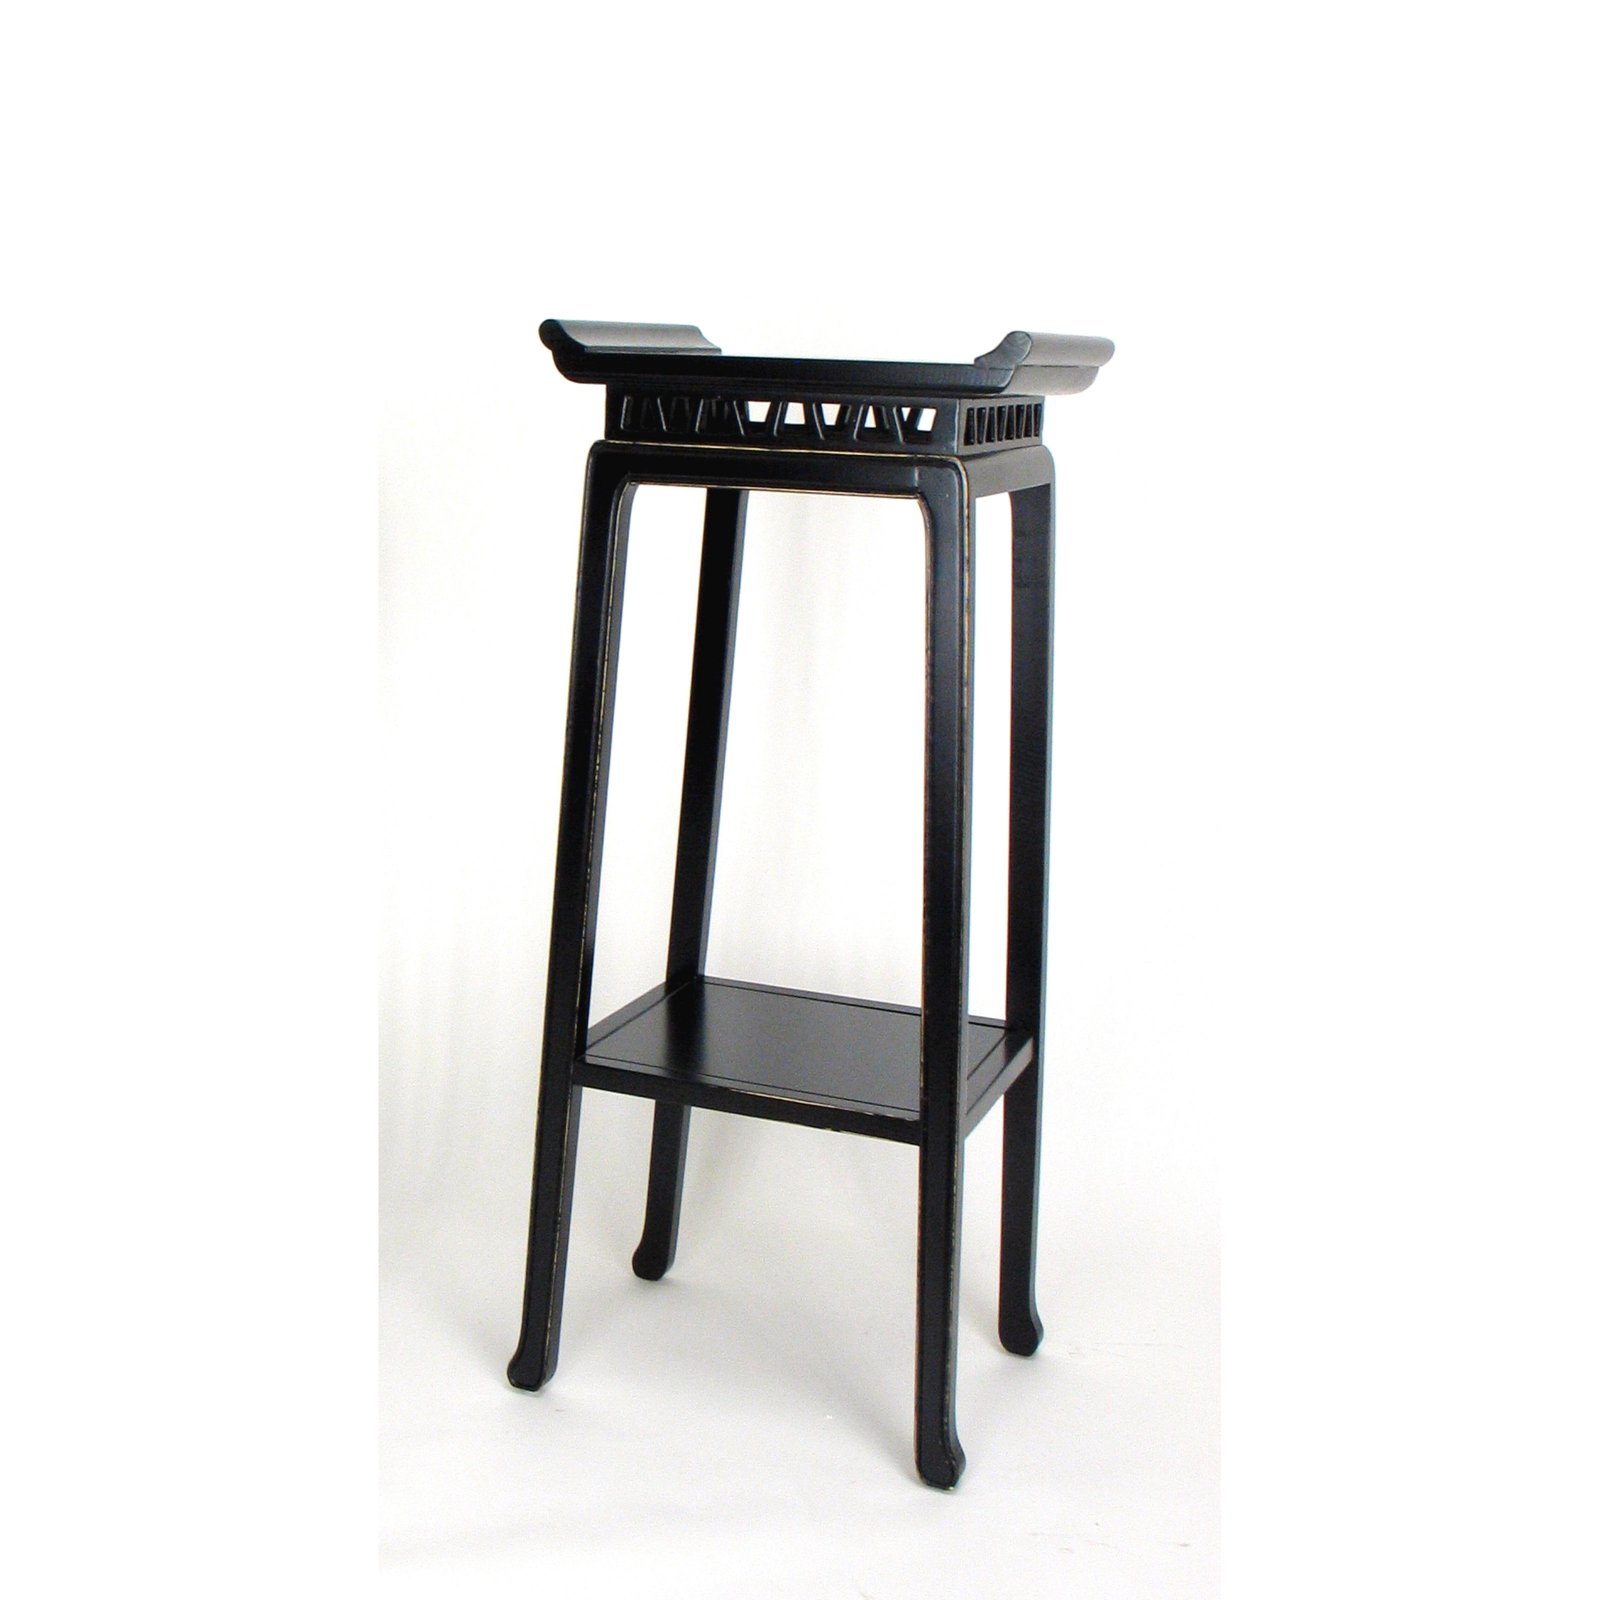 Wayborn Chow Plant Stand in Antique Black - image 1 of 2